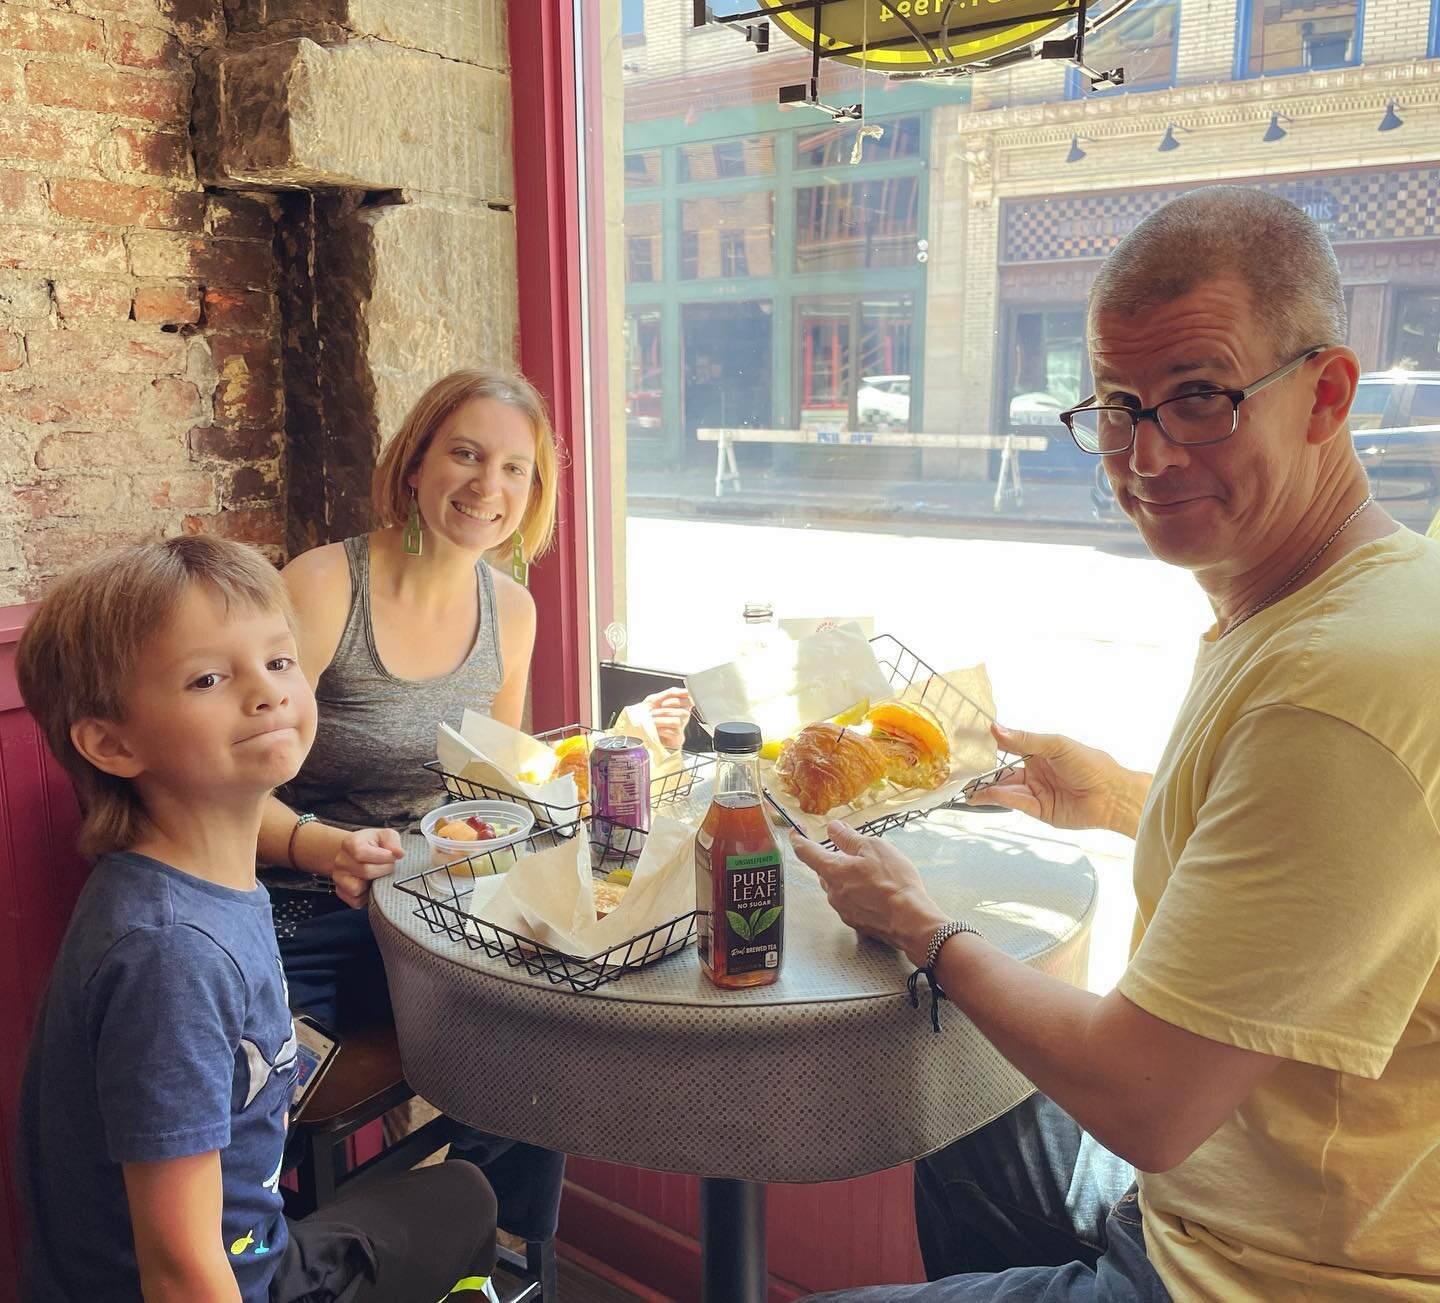 Kevin, Lindsay, and Rowan enjoying their first schnikelheimer of 2022! You know what that means&hellip;PNME is BACK!! Check the link in our bio to come see us this July! #pnme #yum #summer #summer2022 #funinthesun